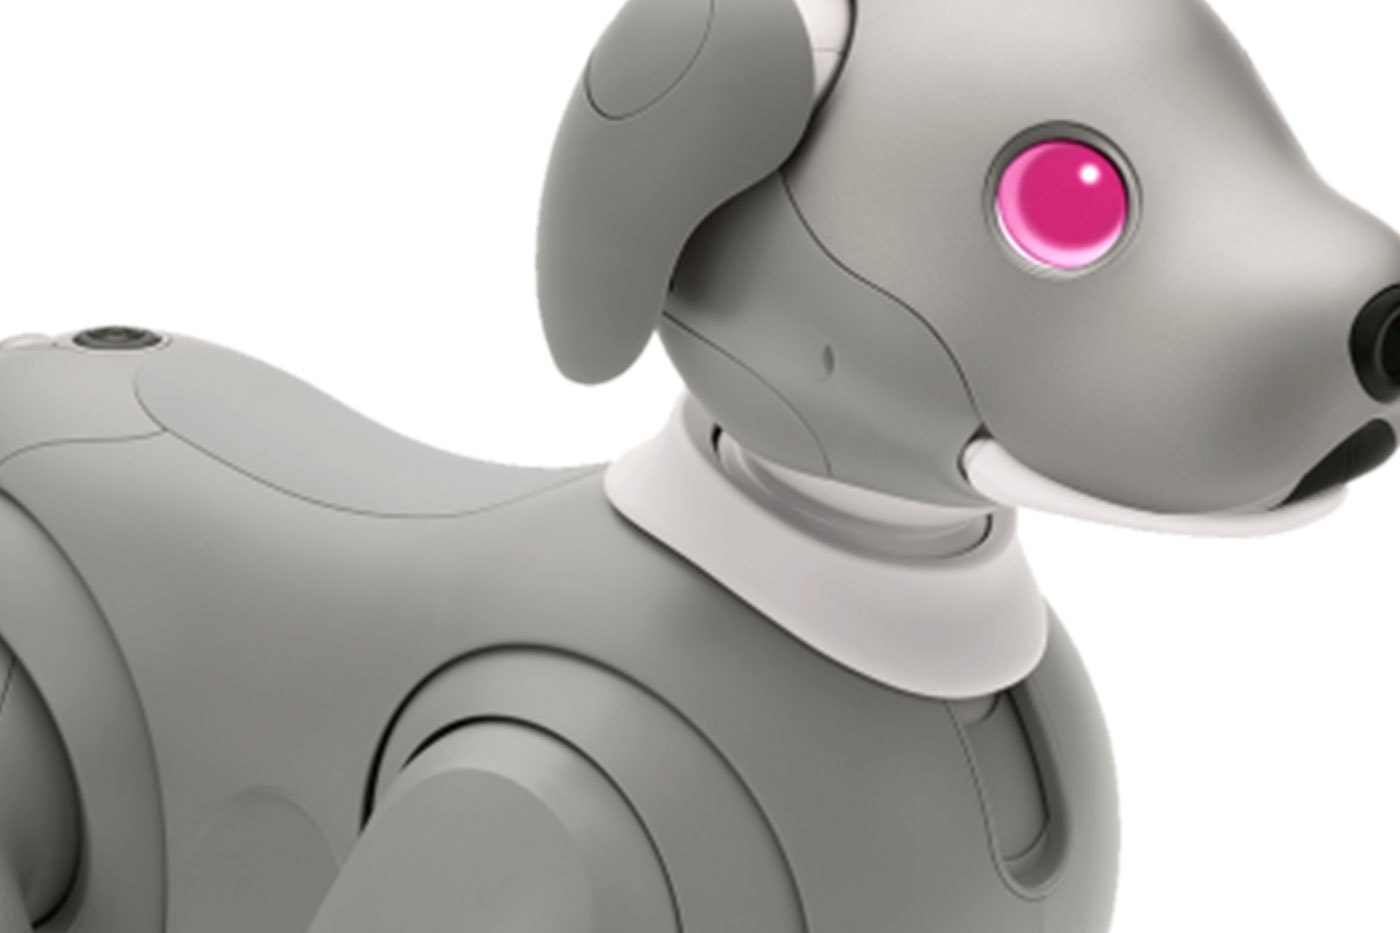 Sony Aibo Robot Dog Black Sesame Edition Release Info Buy Price Artifical Intelligence AI